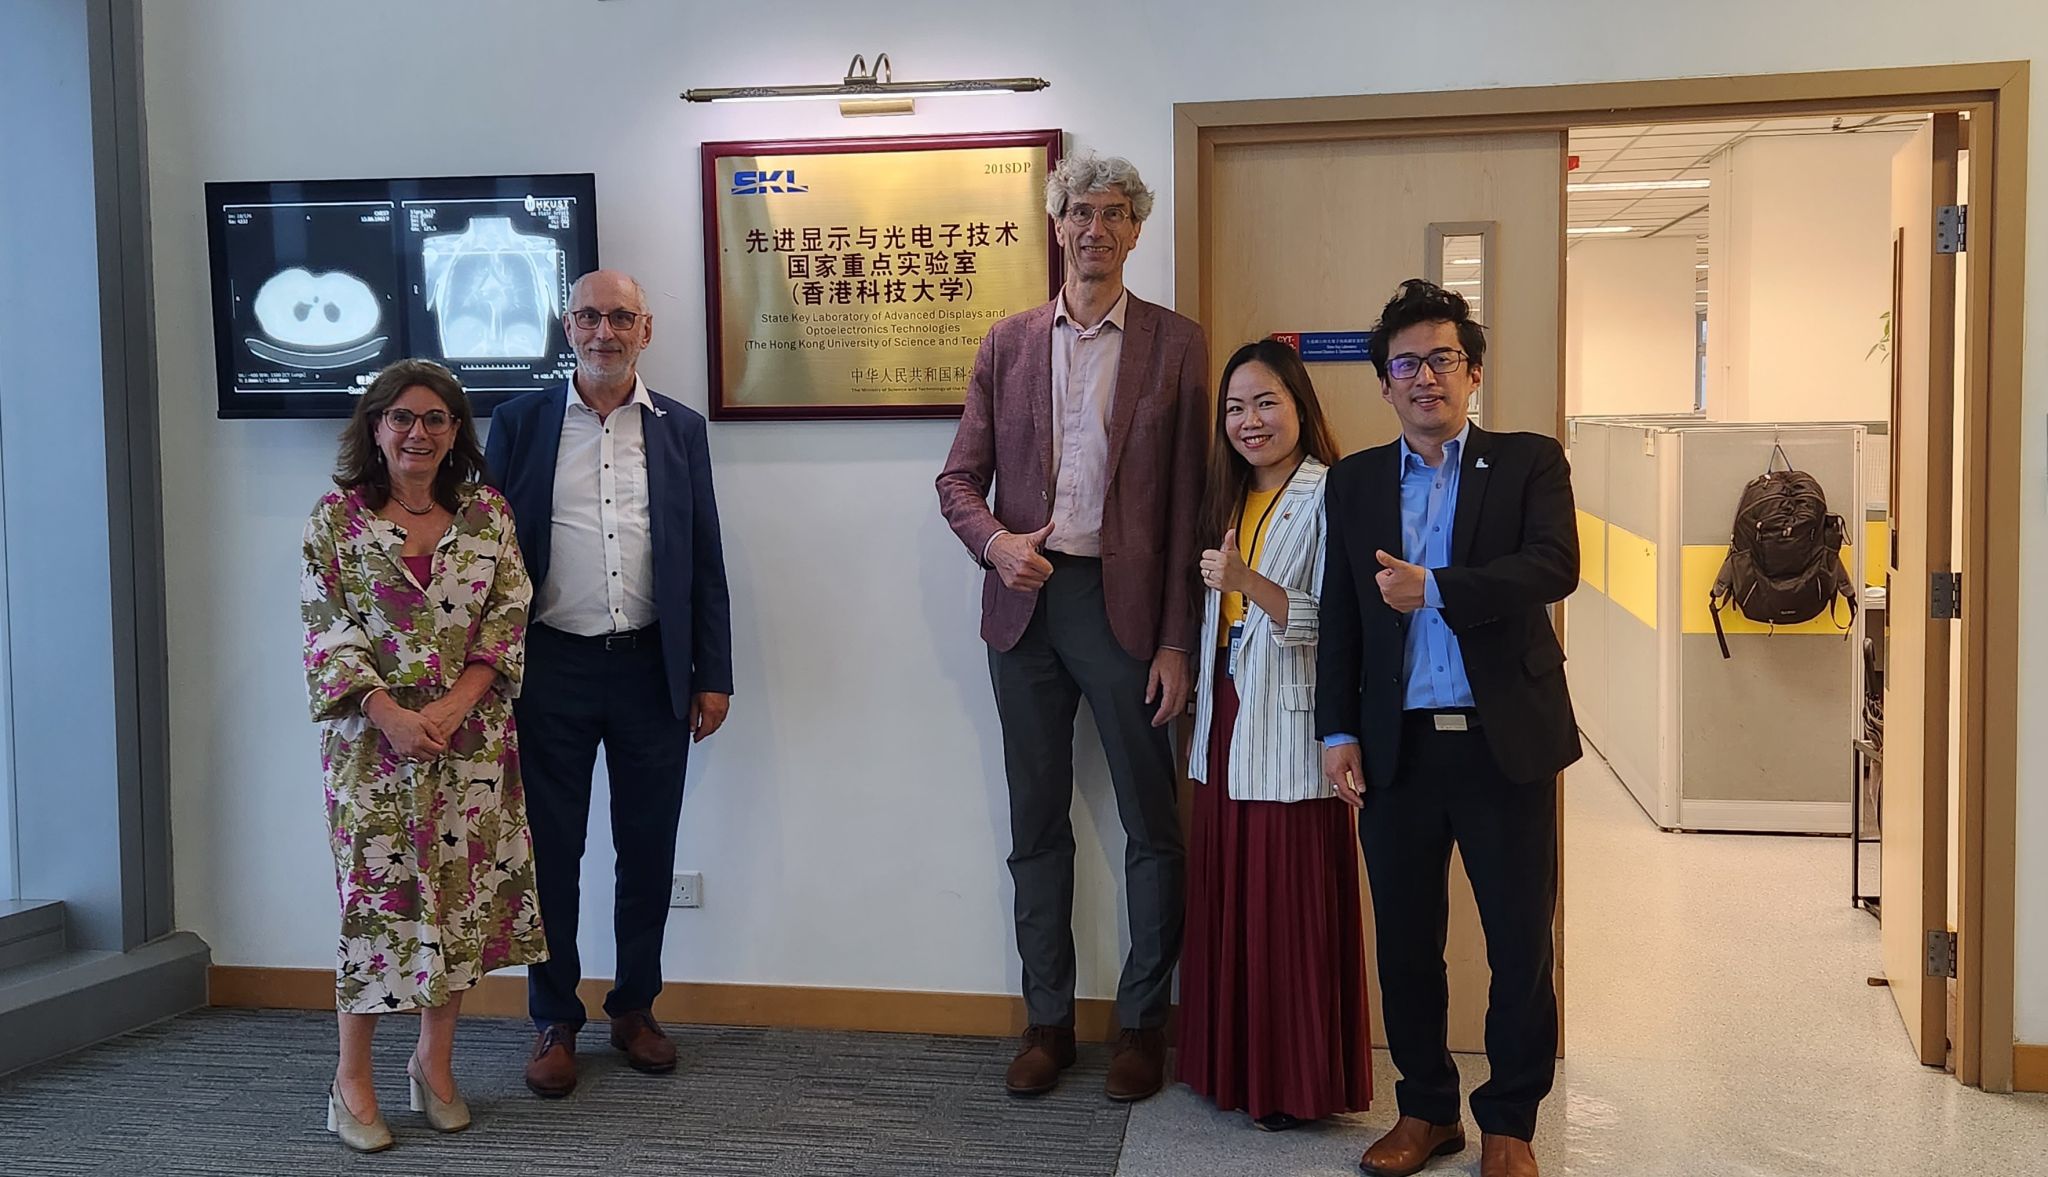 The Ghent University delegation visits the State Key Laboratory of Advanced Displays and Optoelectronics Technologies and Biosciences Central Research Facility.